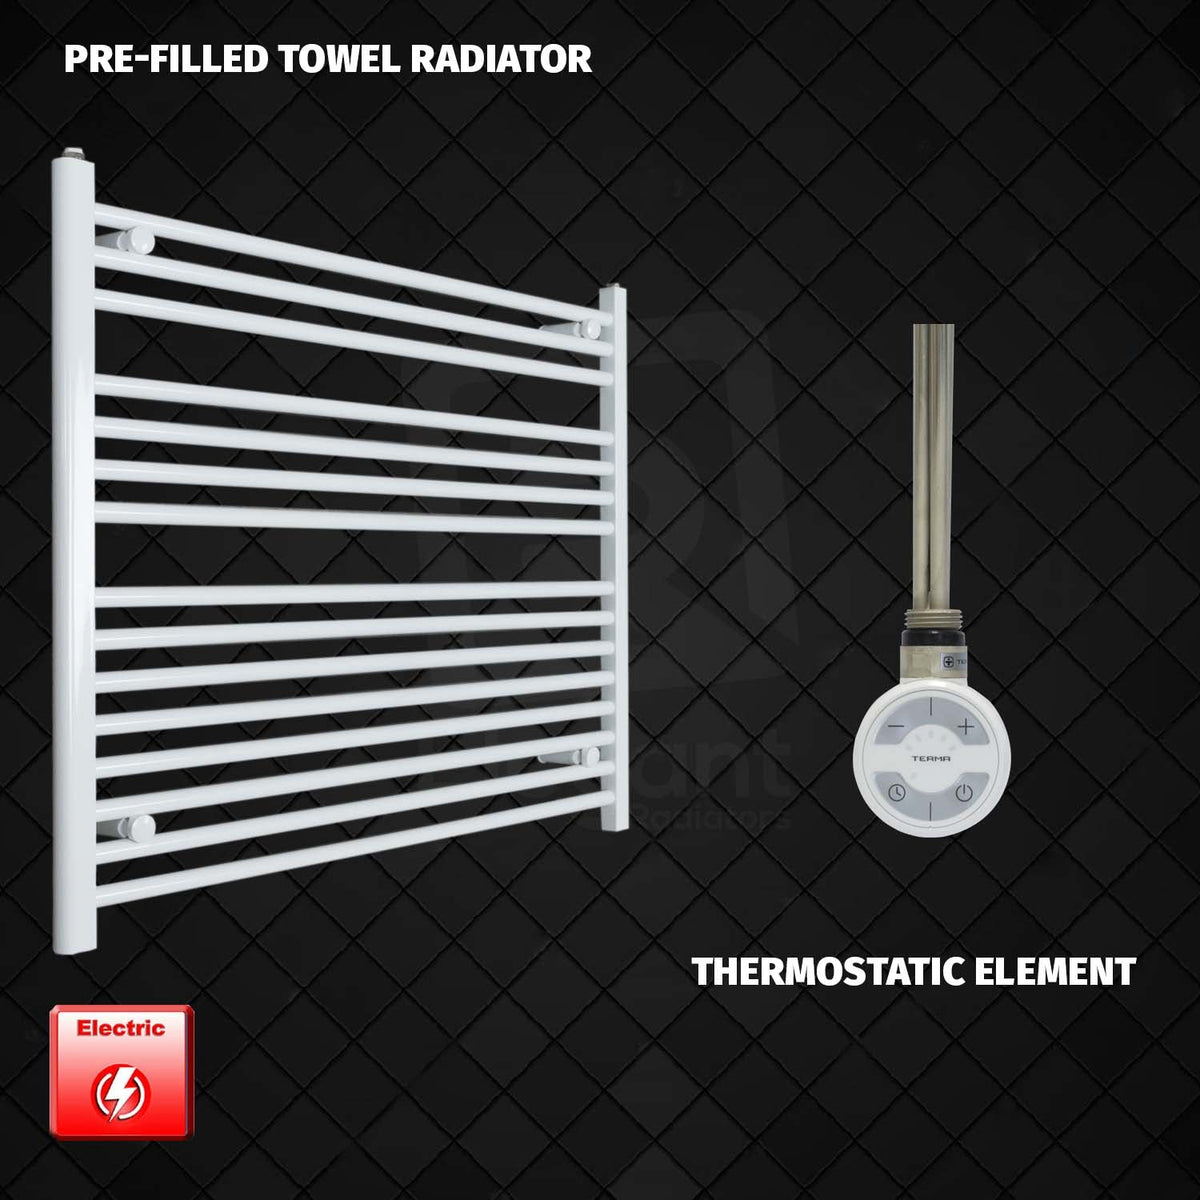 800 mm High 1100 mm Wide Pre-Filled Electric Heated Towel Rail Radiator White HTR MOA Thermostatic element no timer